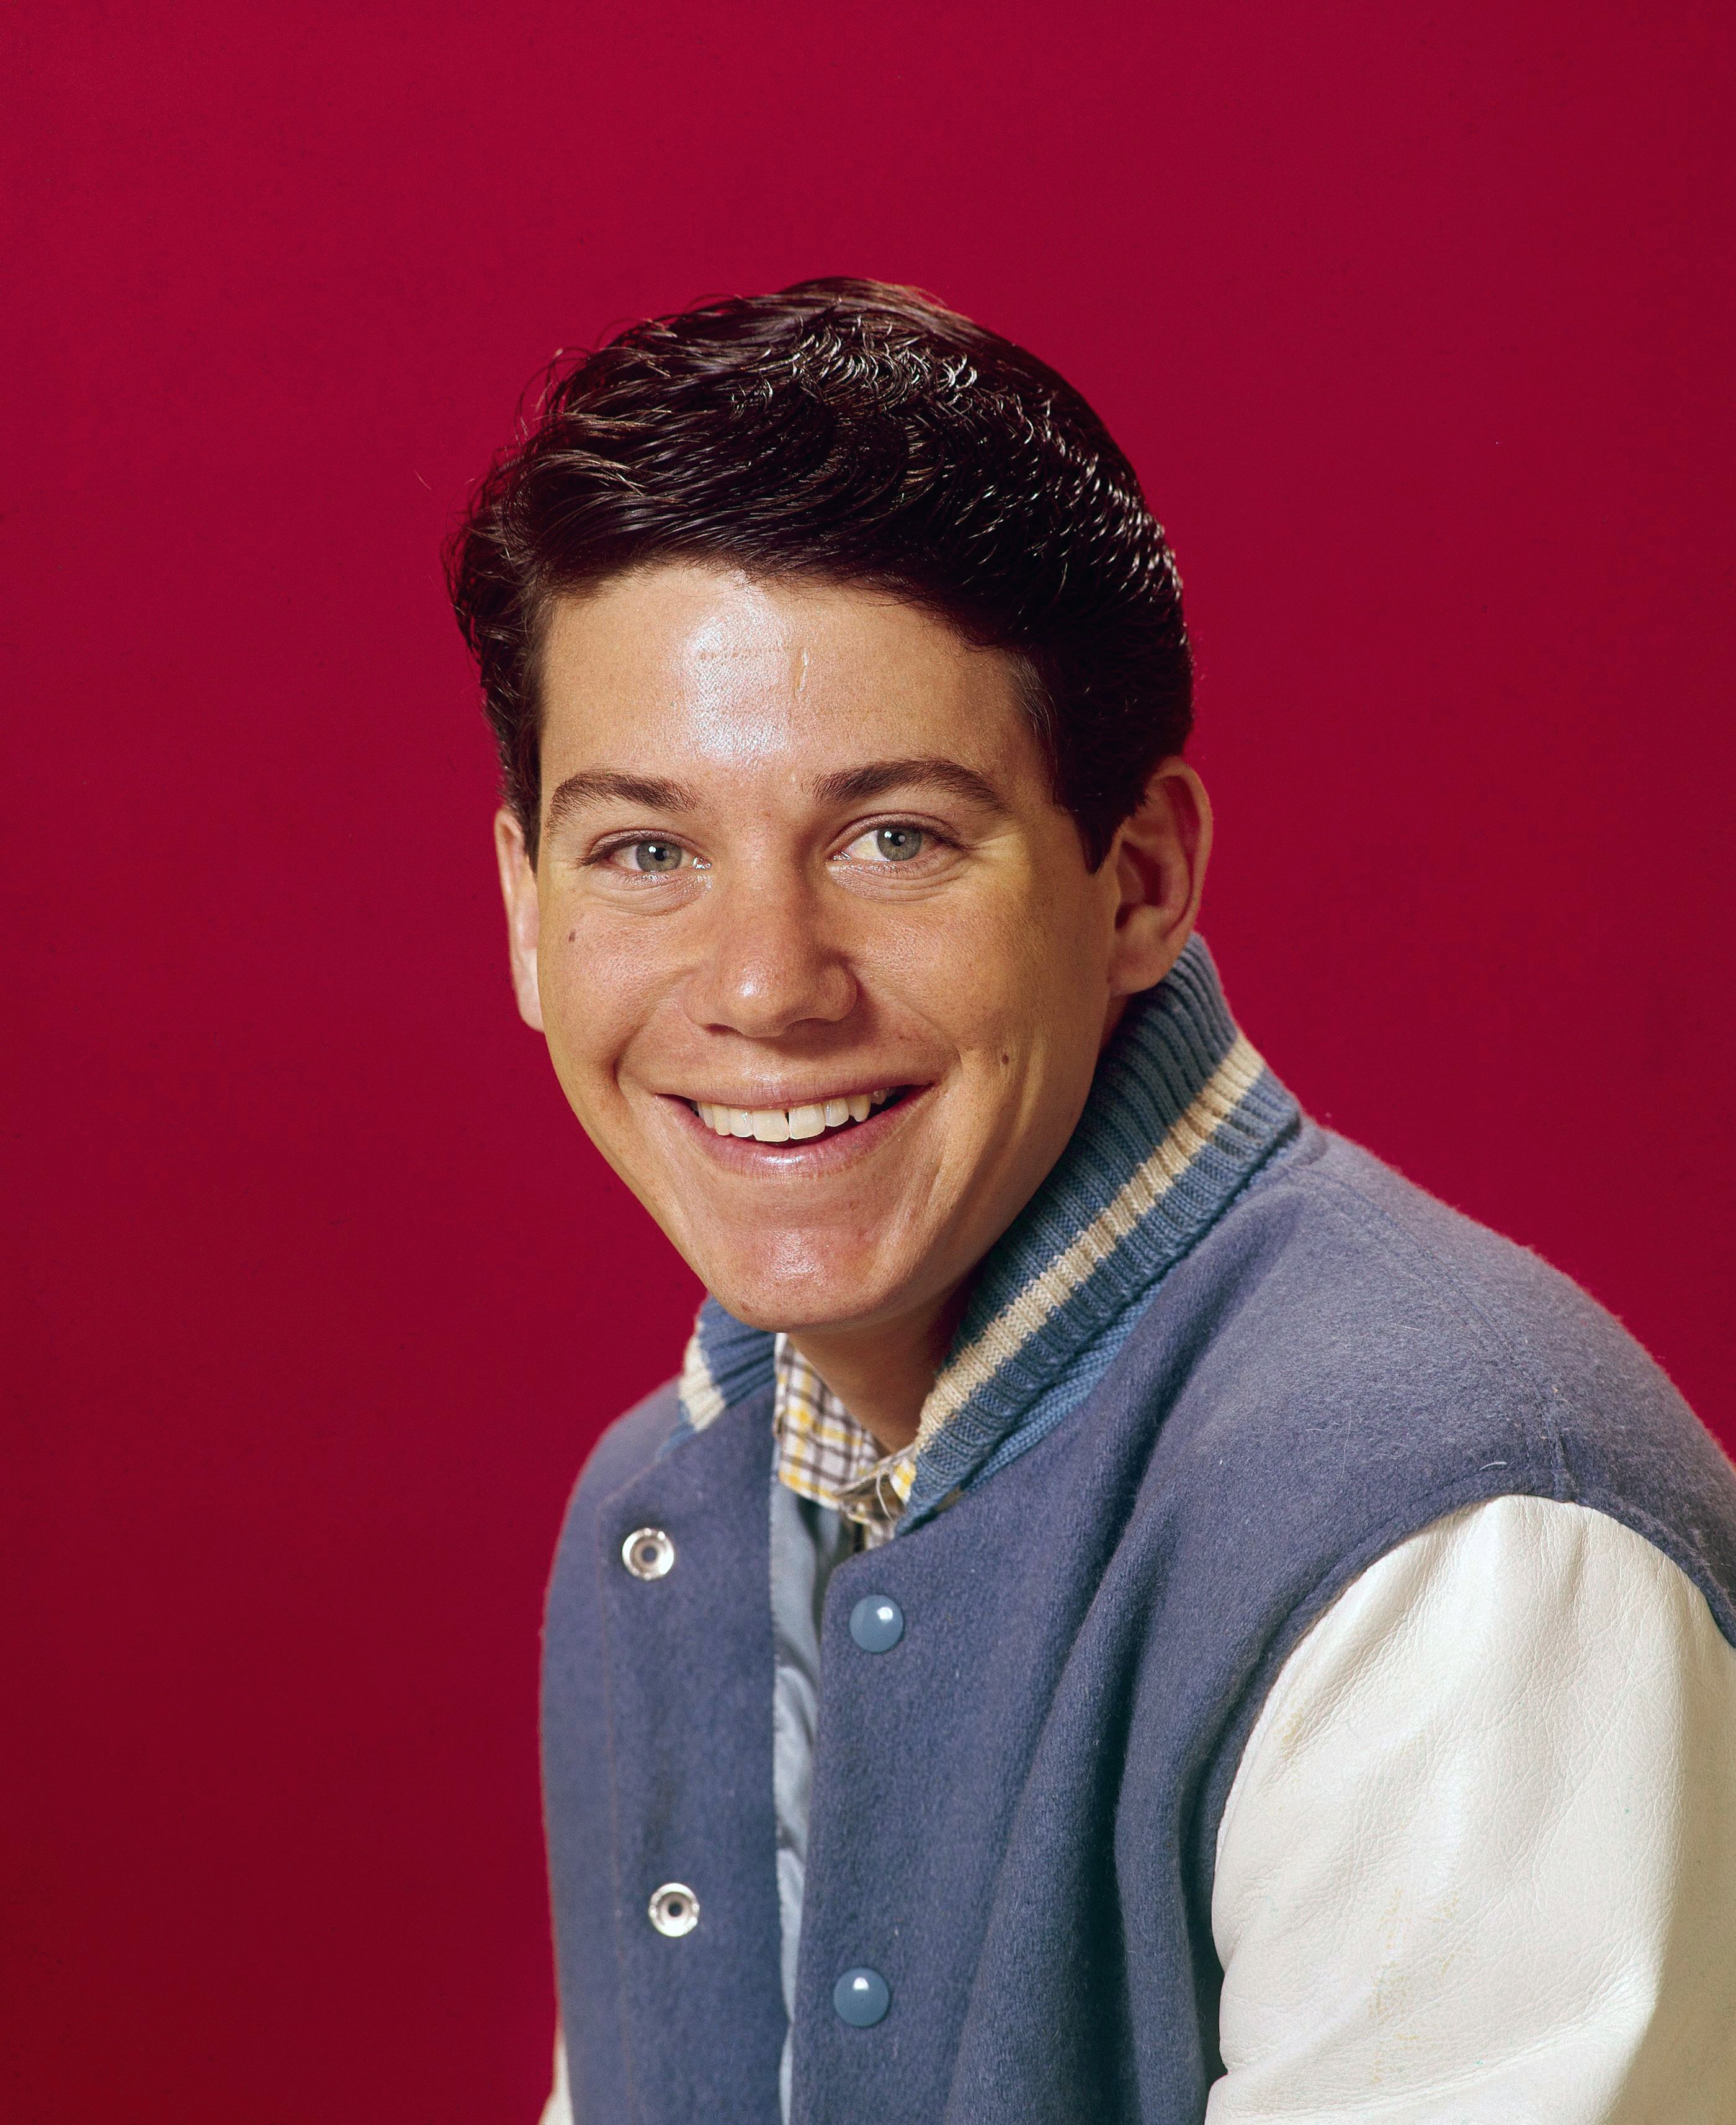 Anson Williams on "Happy Days" in 1974. | Source: Getty Images